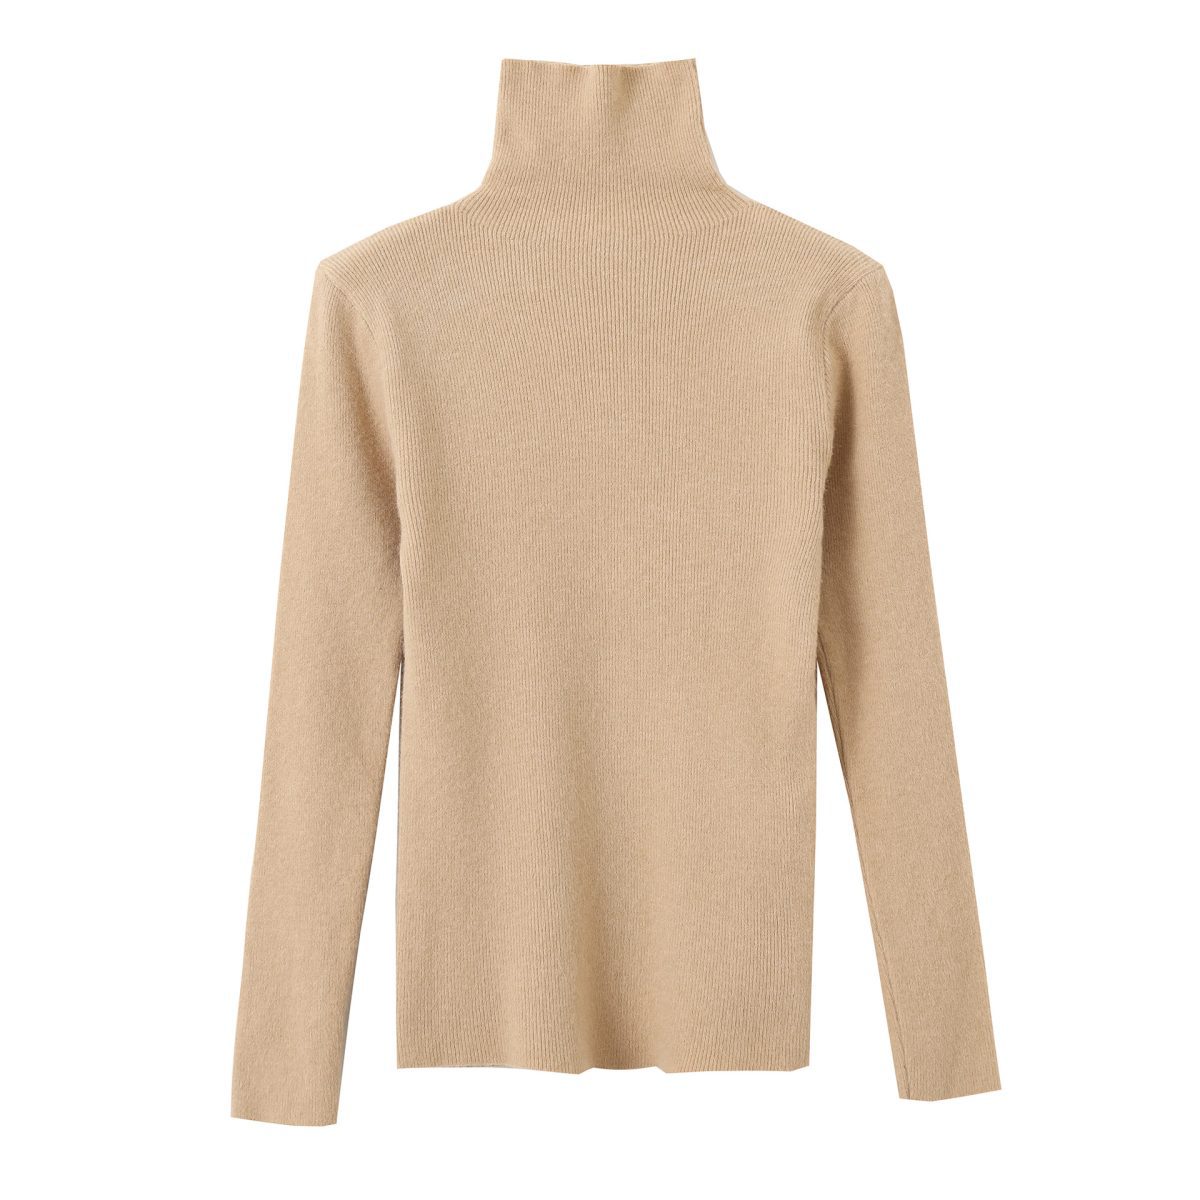 Solid Color Turtleneck Sweater in Sweaters